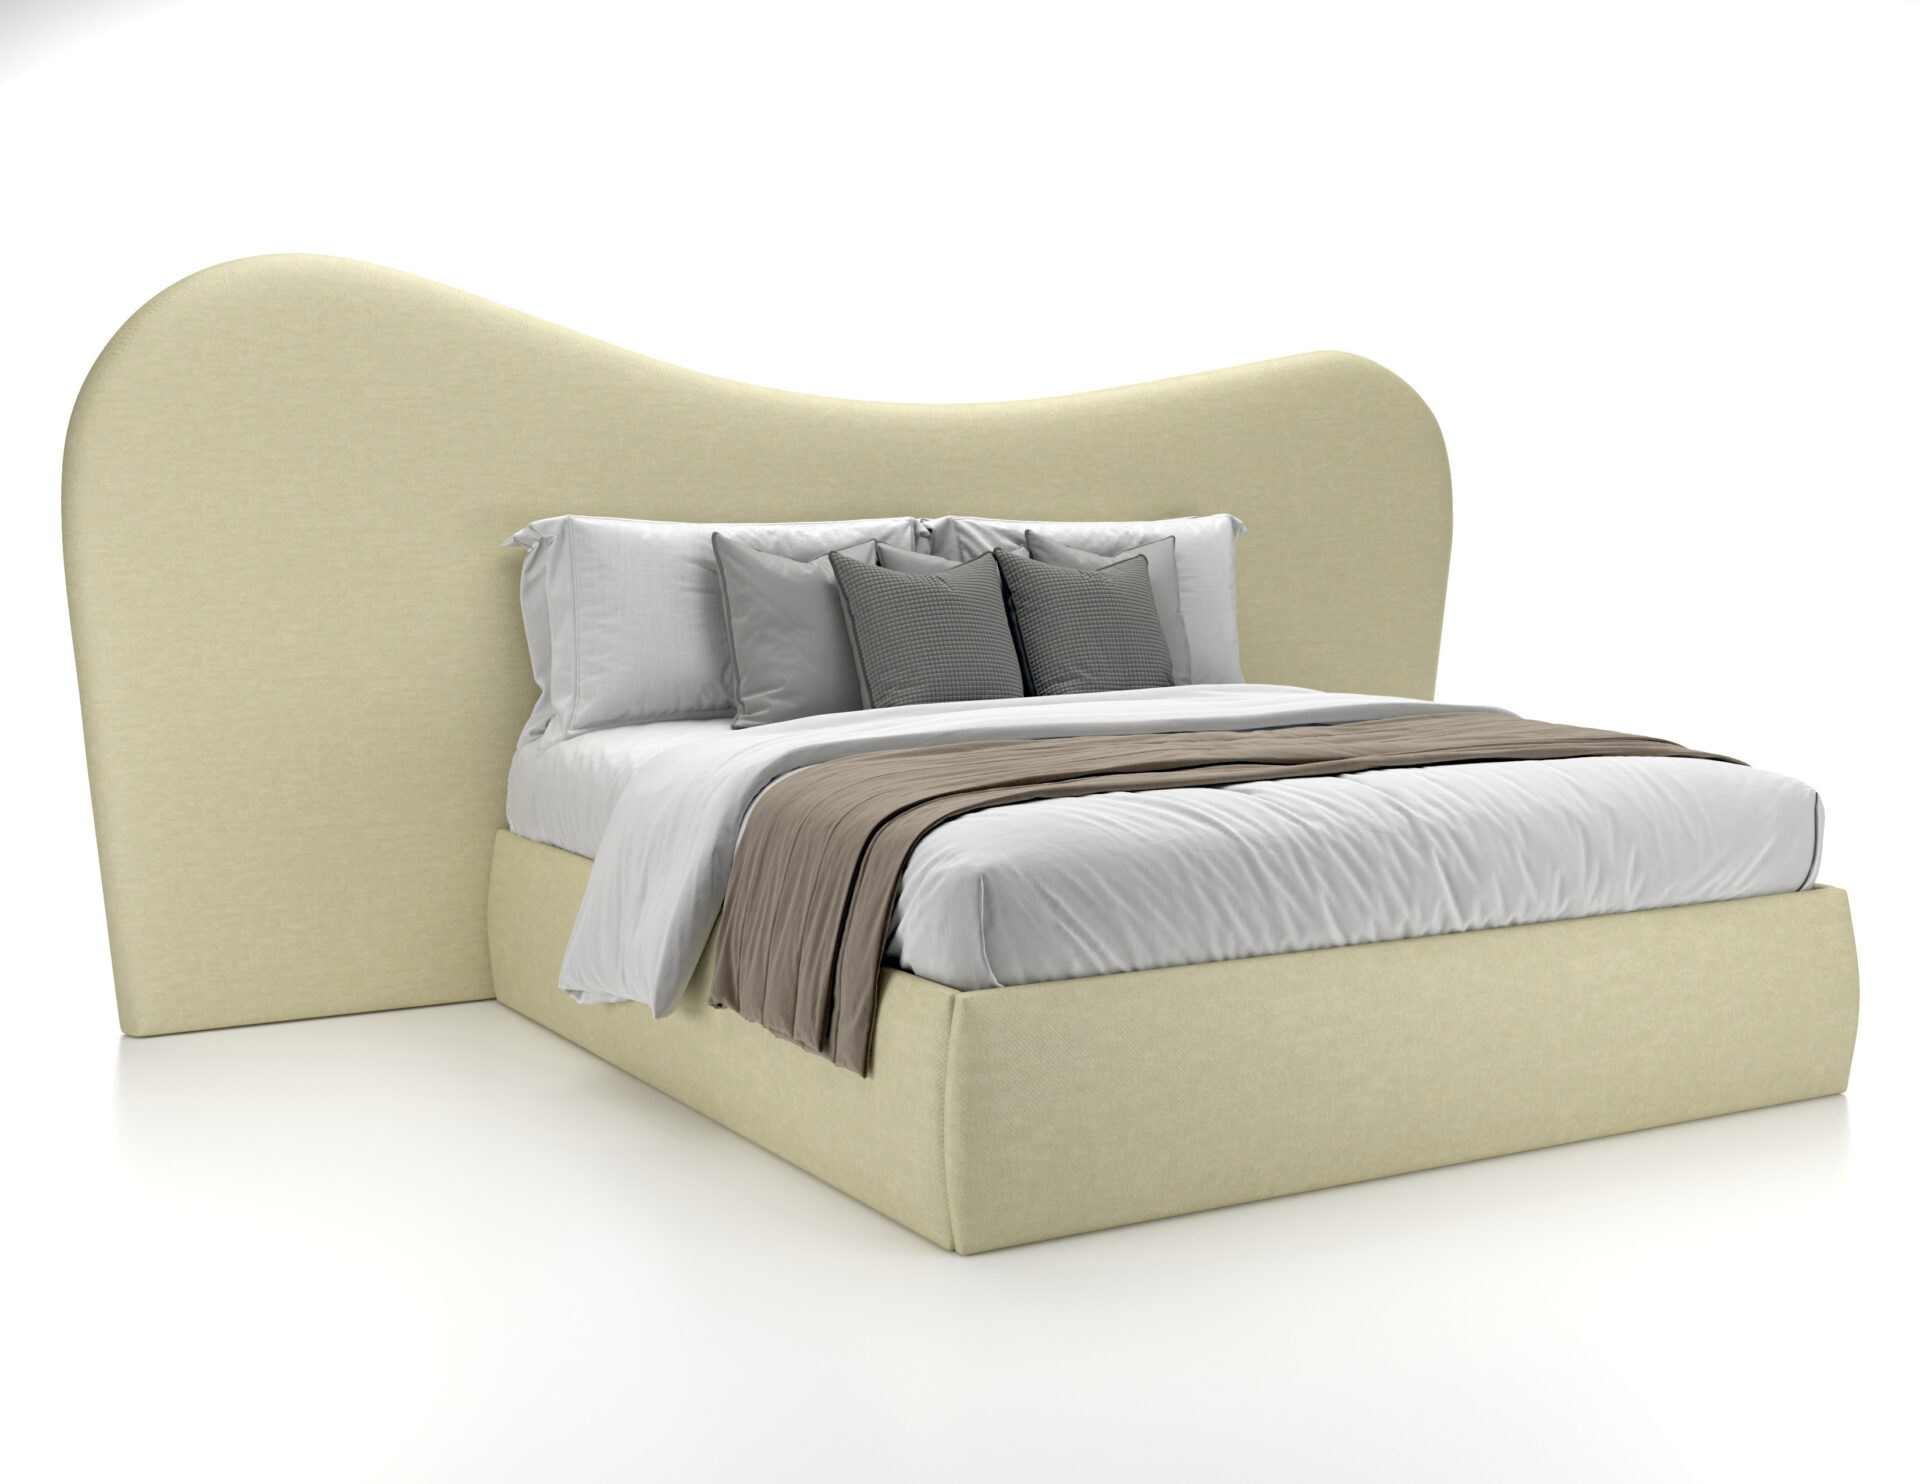 COURBER-upholstered-freestanding-bed-luxury-furniture-blend-home-furnishings